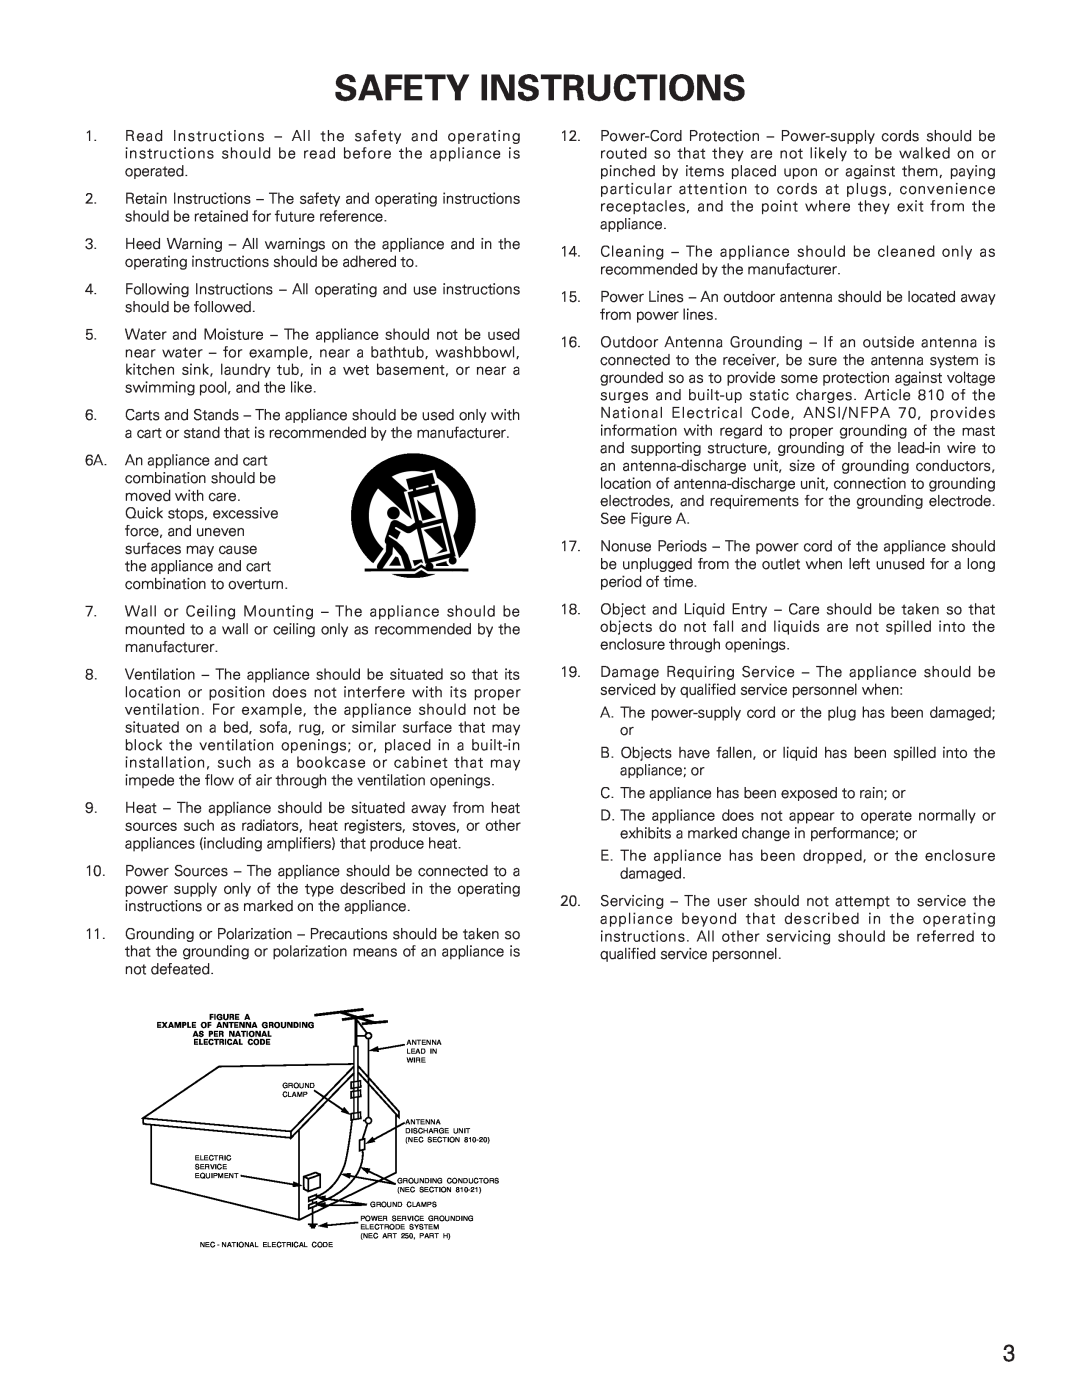 Denon DN-2100F operating instructions Safety Instructions 